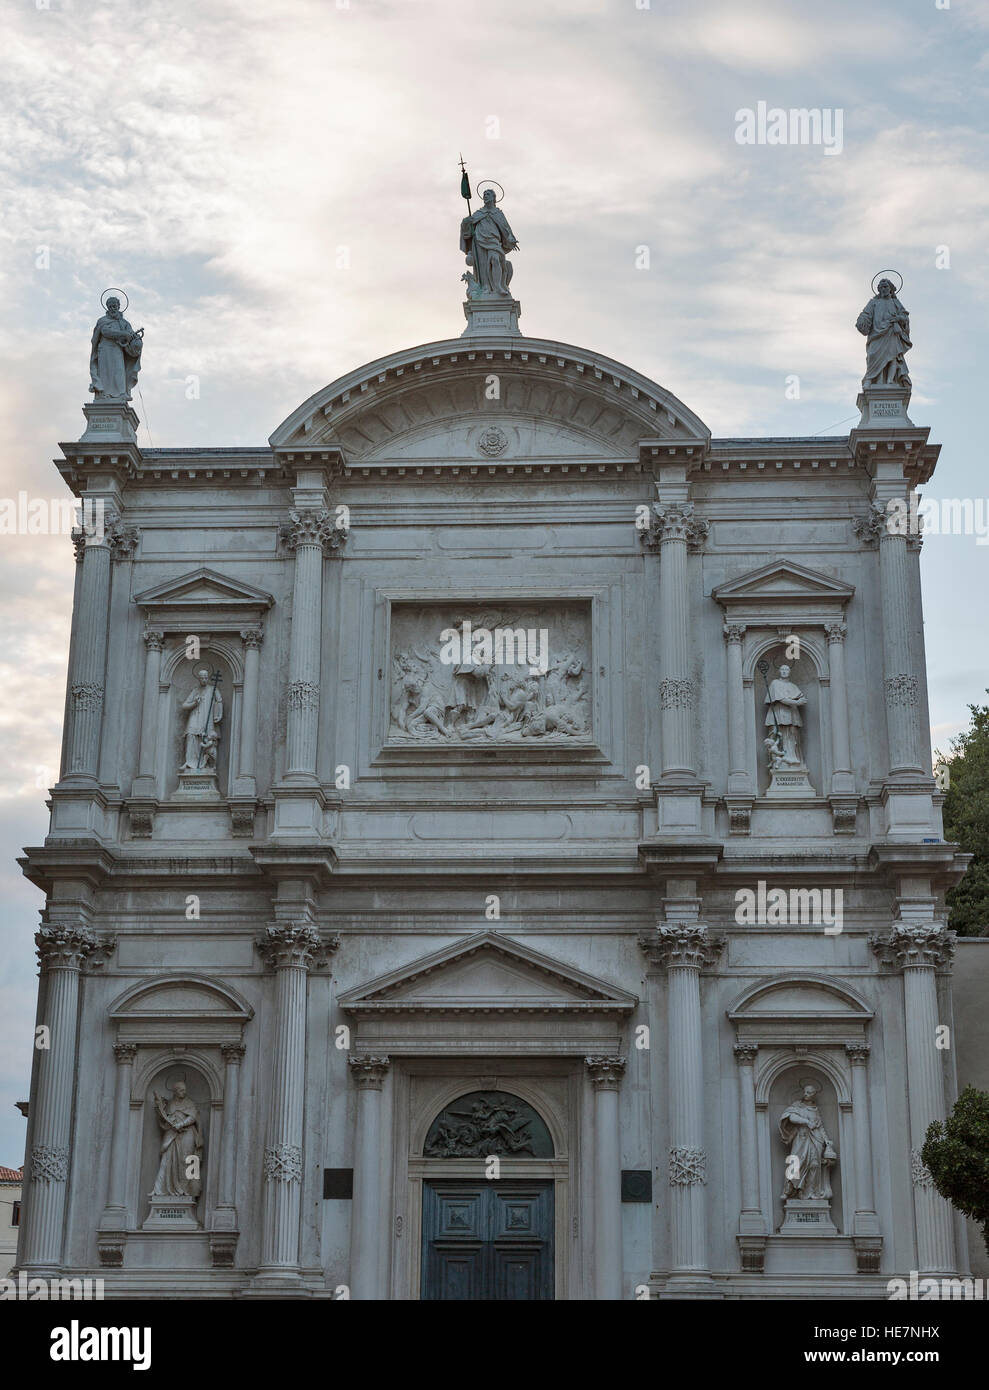 Church of Saint Roch or Chiesa di San Rocco facade at sunset with dramatic sky in Venice, Italy Stock Photo